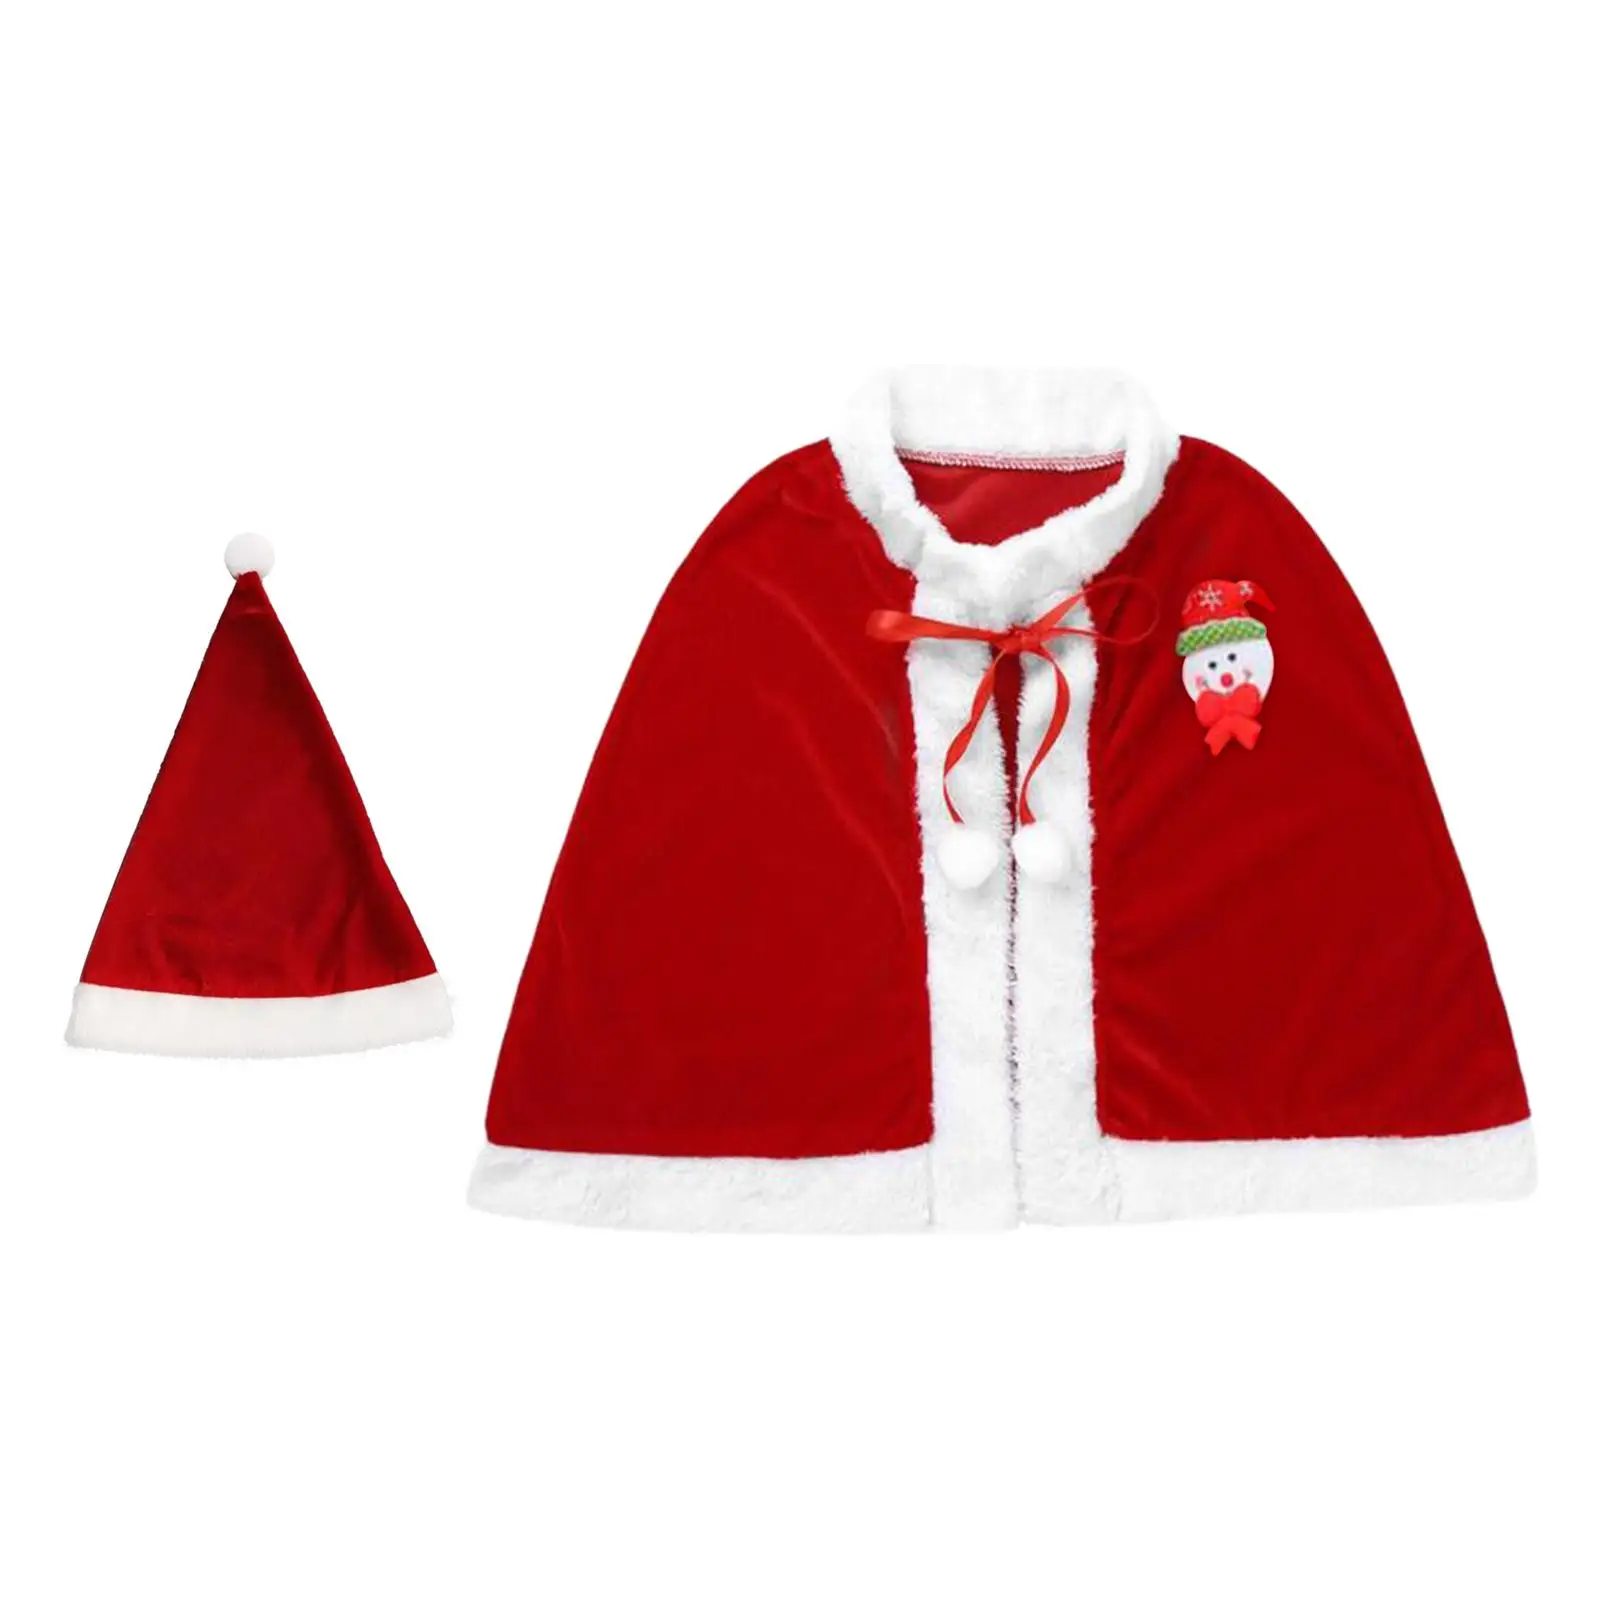 Kids Christmas Cloak with Brooch Pin Shawl Comfortable Lace up Red Cape for Holidays Dress up Masquerade Props Stage Performance